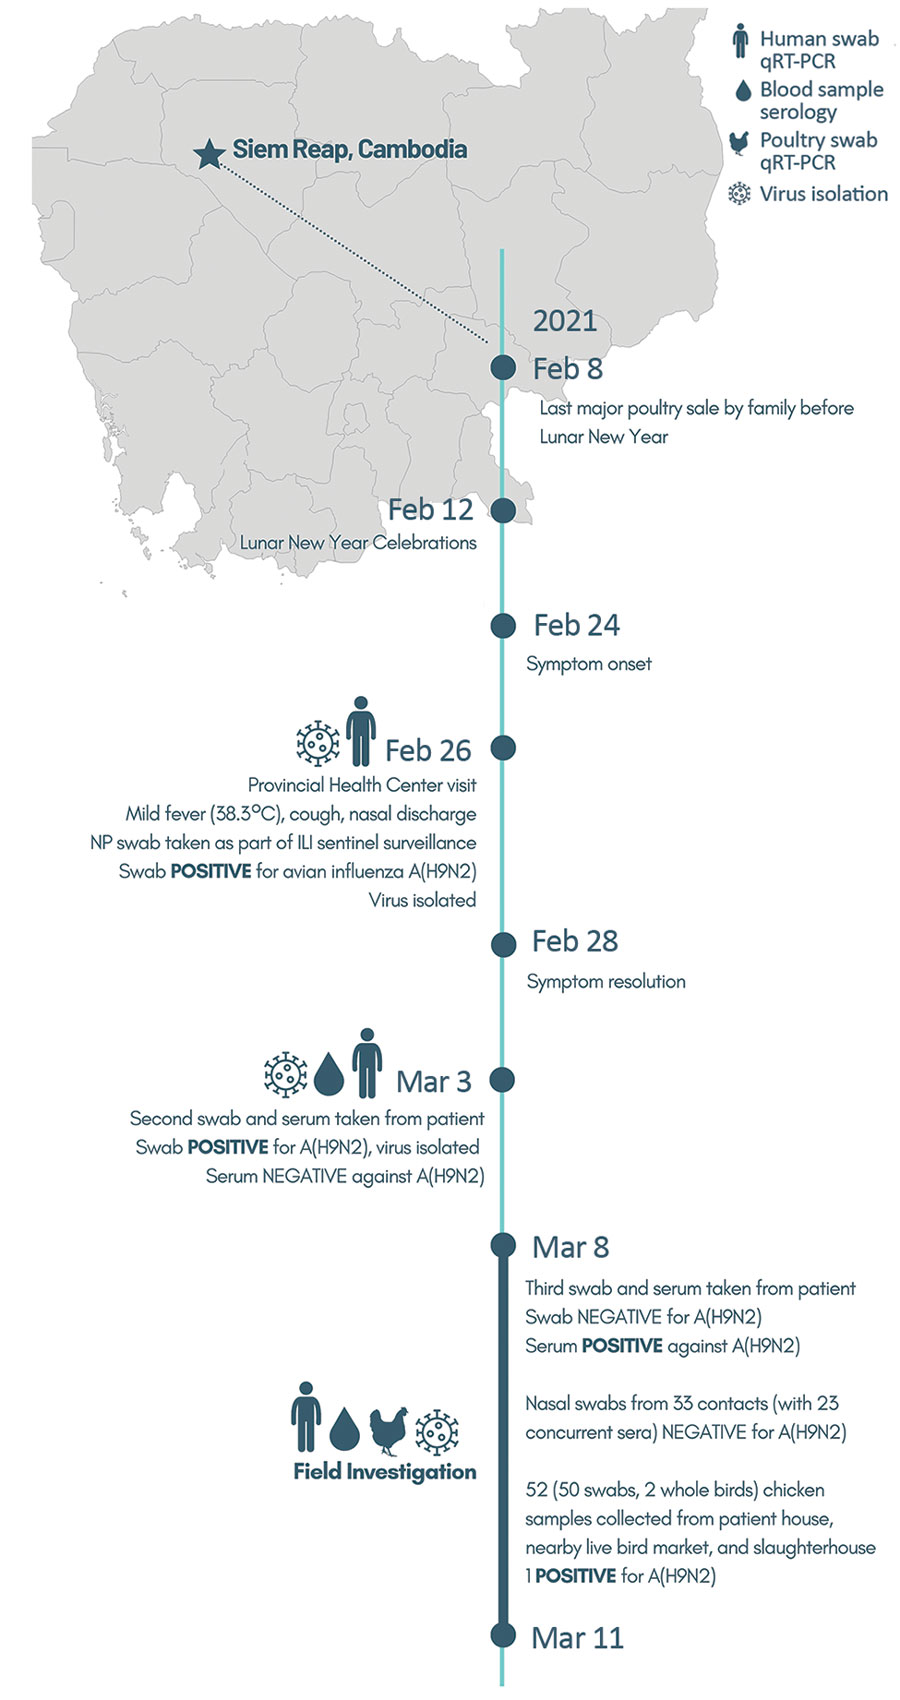 Locations of human infection and timeline of key events in the One Health investigation, Cambodia, February–March 2021. Key points and findings are indicated next to dates. Sampling and testing results are indicated by icons (in key). ILI, influenza-like illness; NP, nasopharyngeal; qRT-PCR, quantitative reverse transcription PCR.